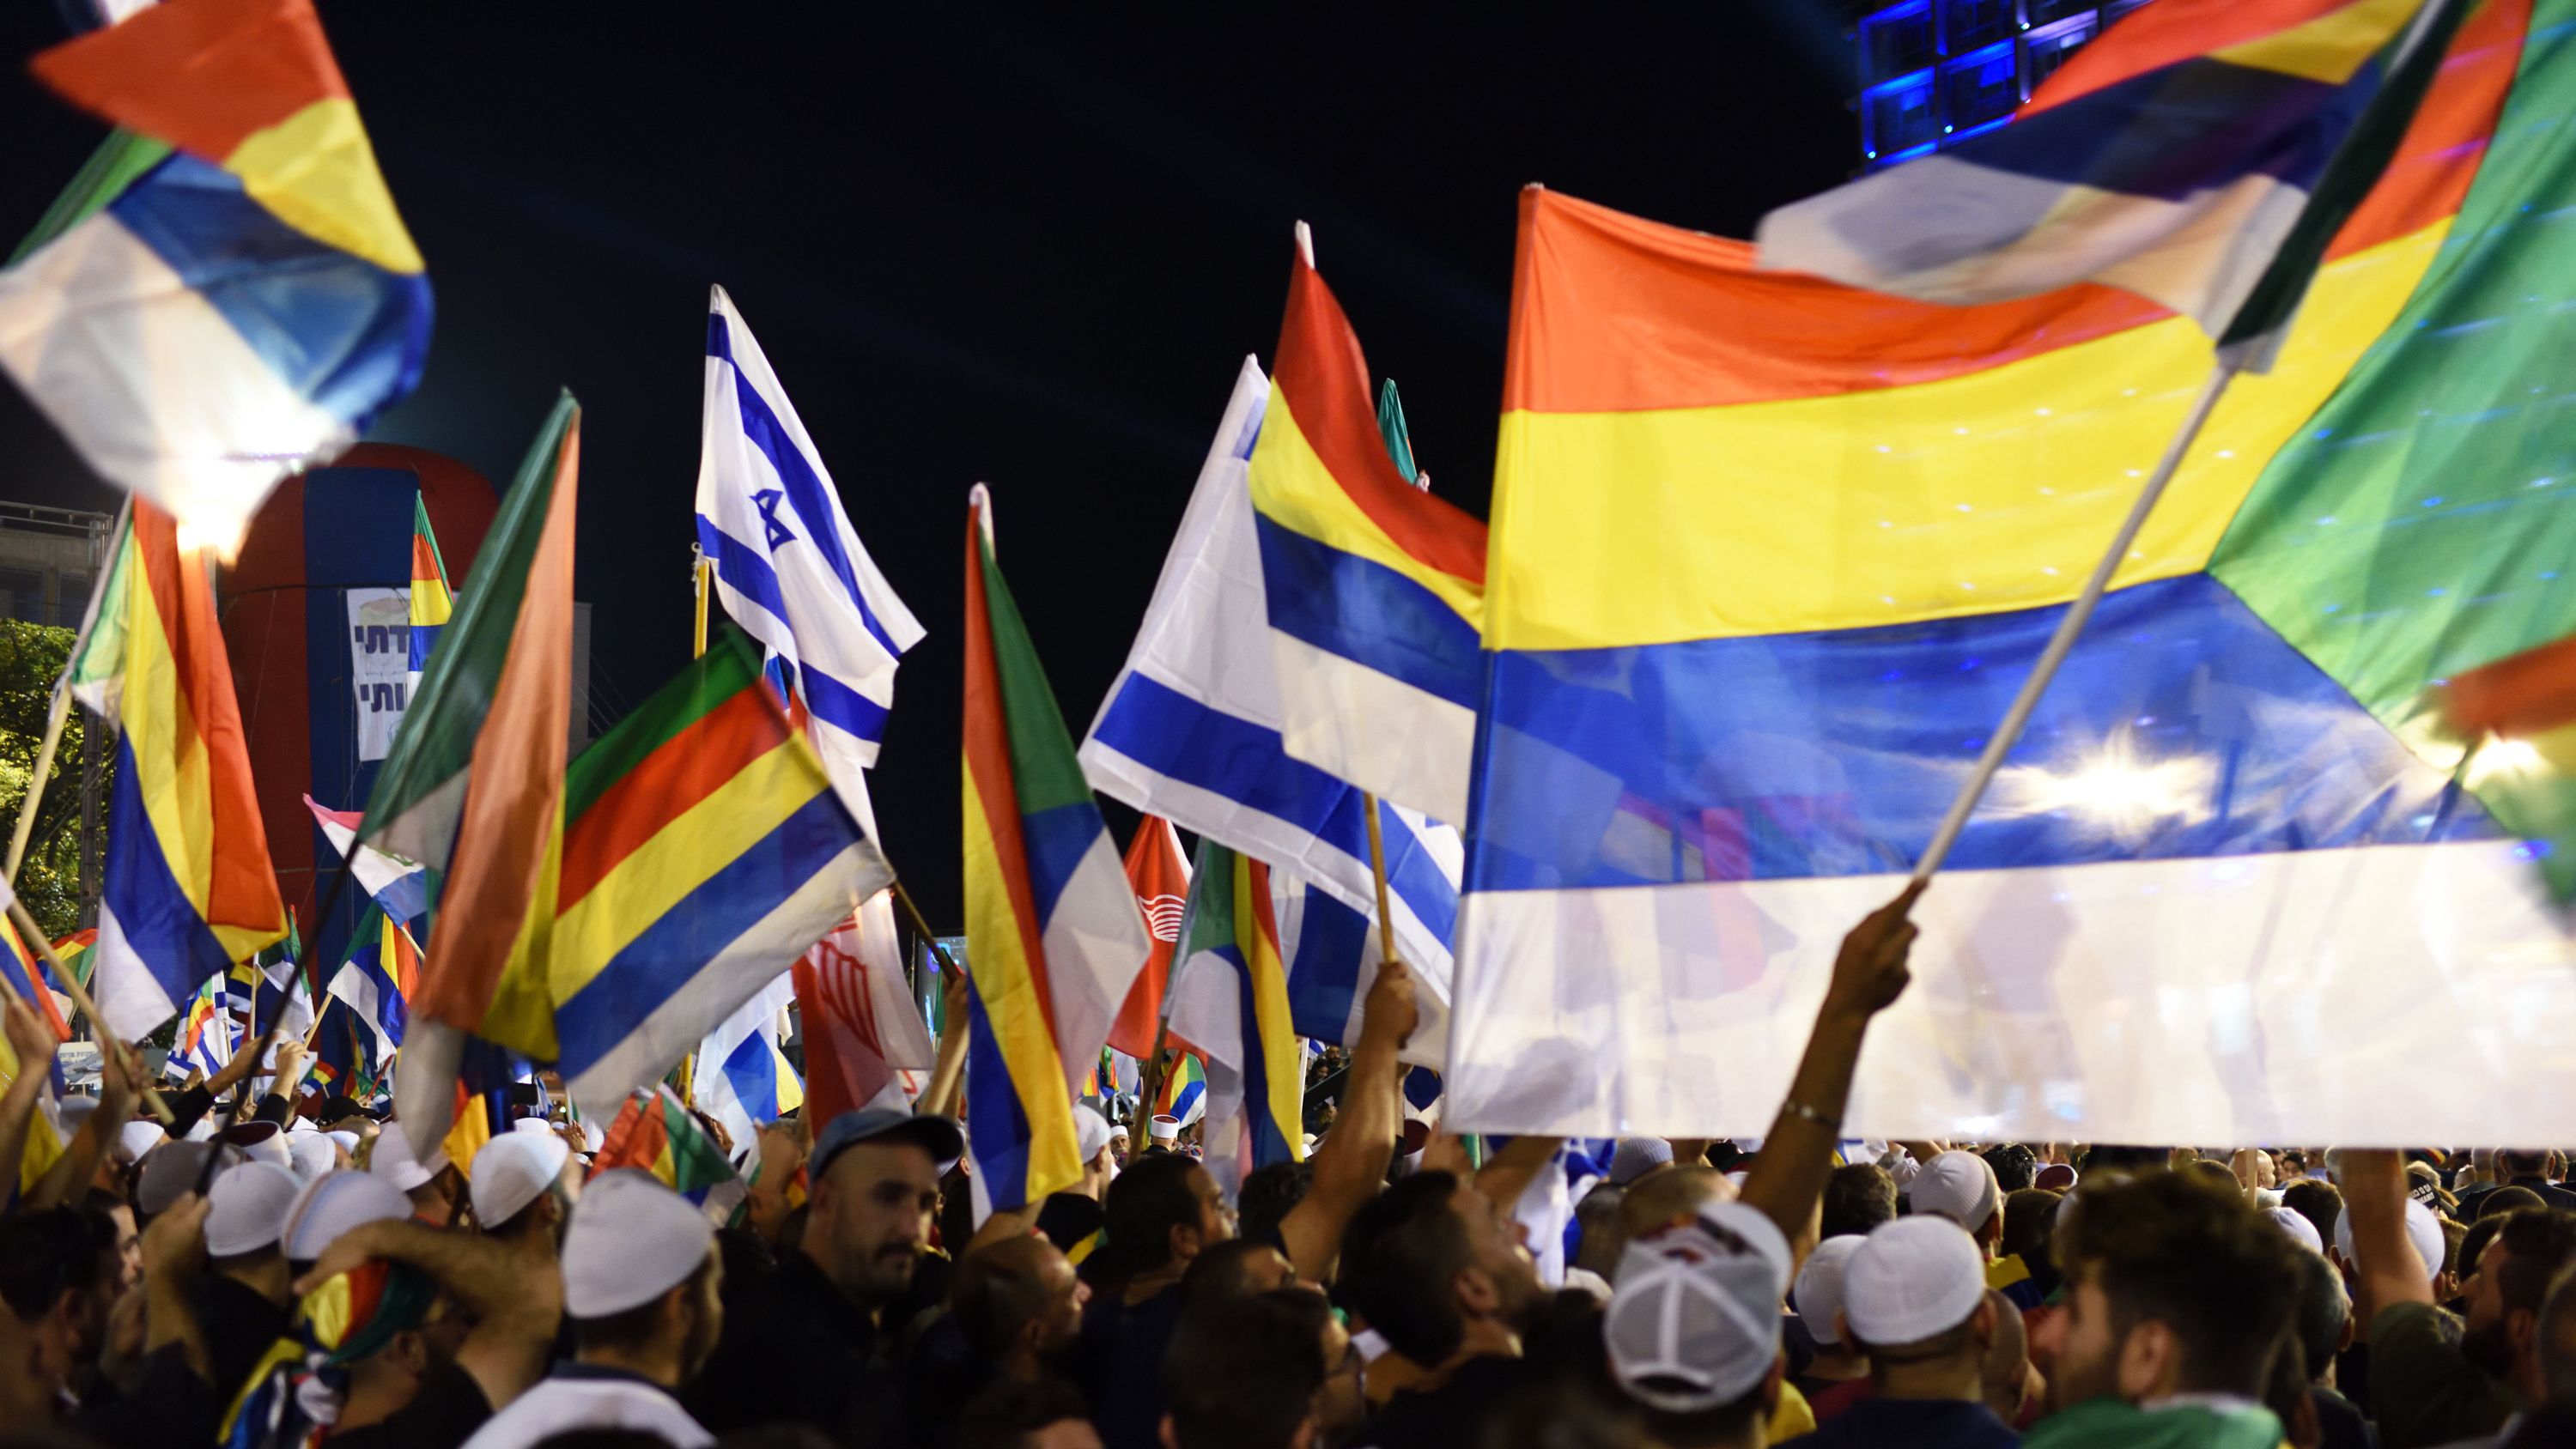 Israeli Druze have played a critical role in the country's military response to the Hamas attack on October 7. Yet issues surrounding their rights as equal citizens remain unresolved, members of the community say.